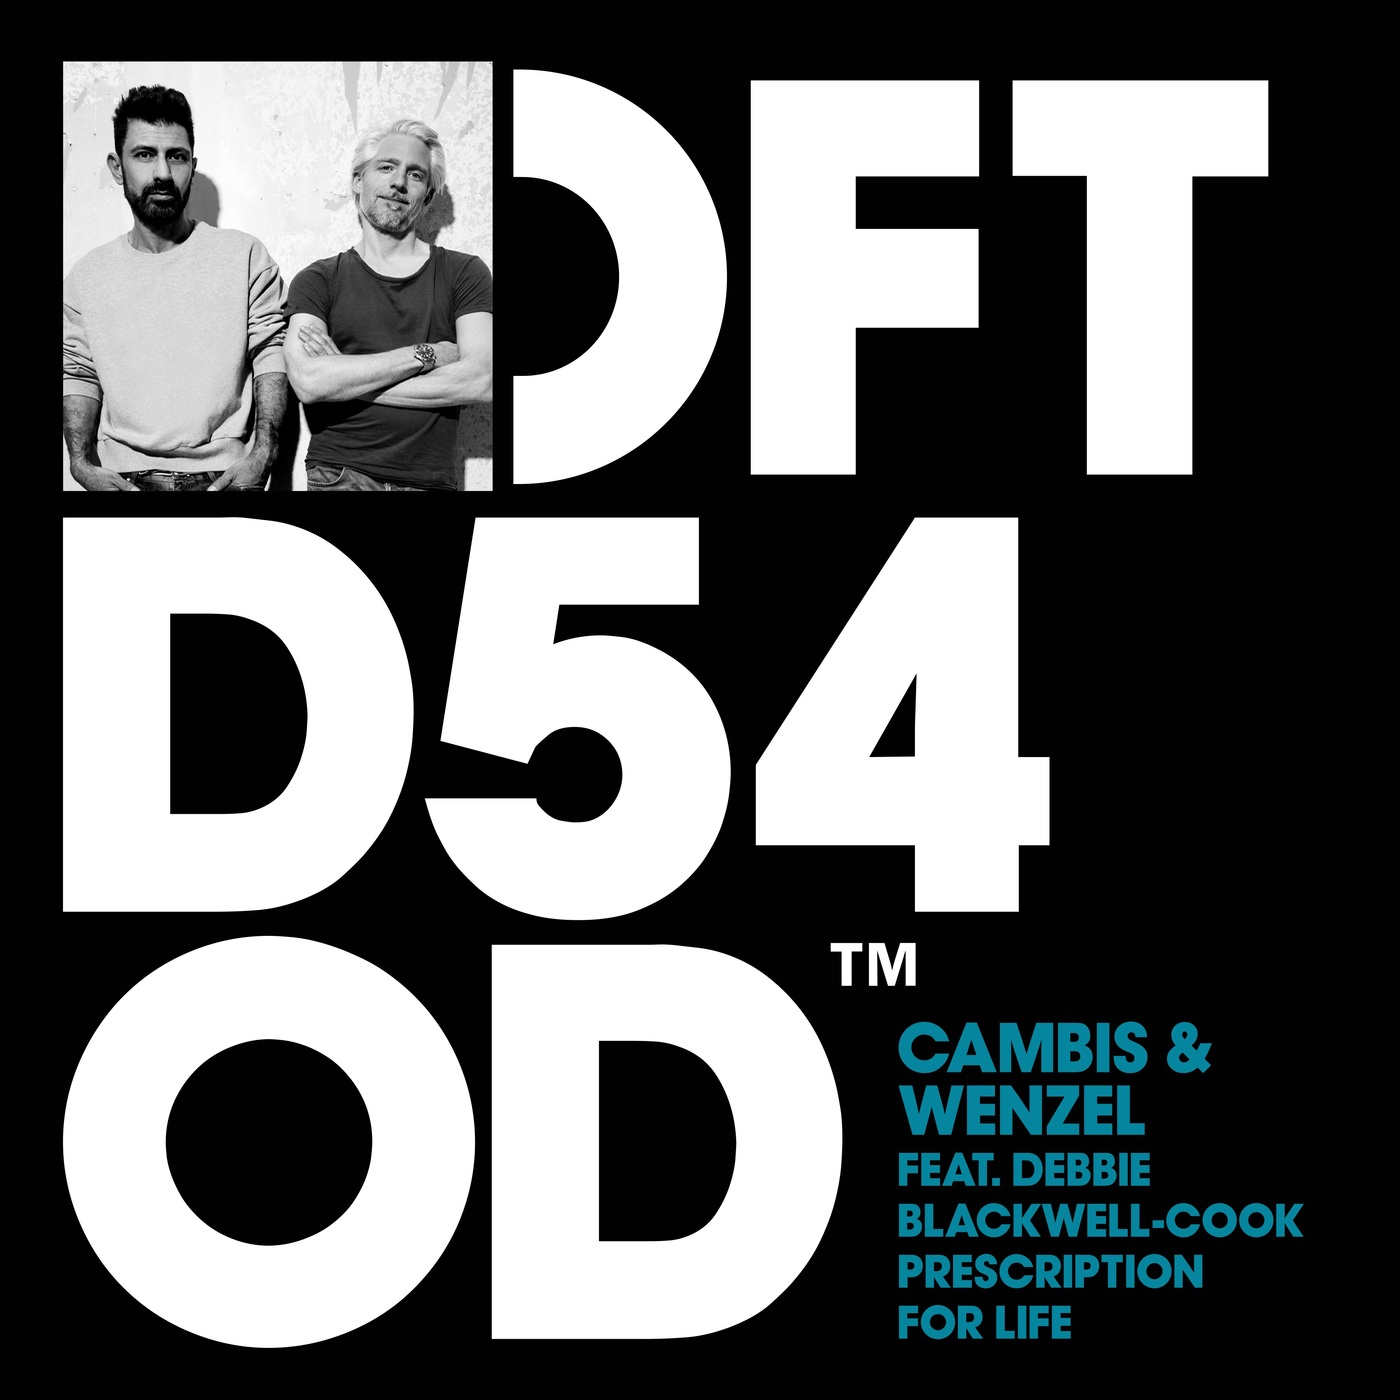 Cambis & Wenzel - Prescription For Life (feat. Debbi Blackwell-Cook) / Defected Records